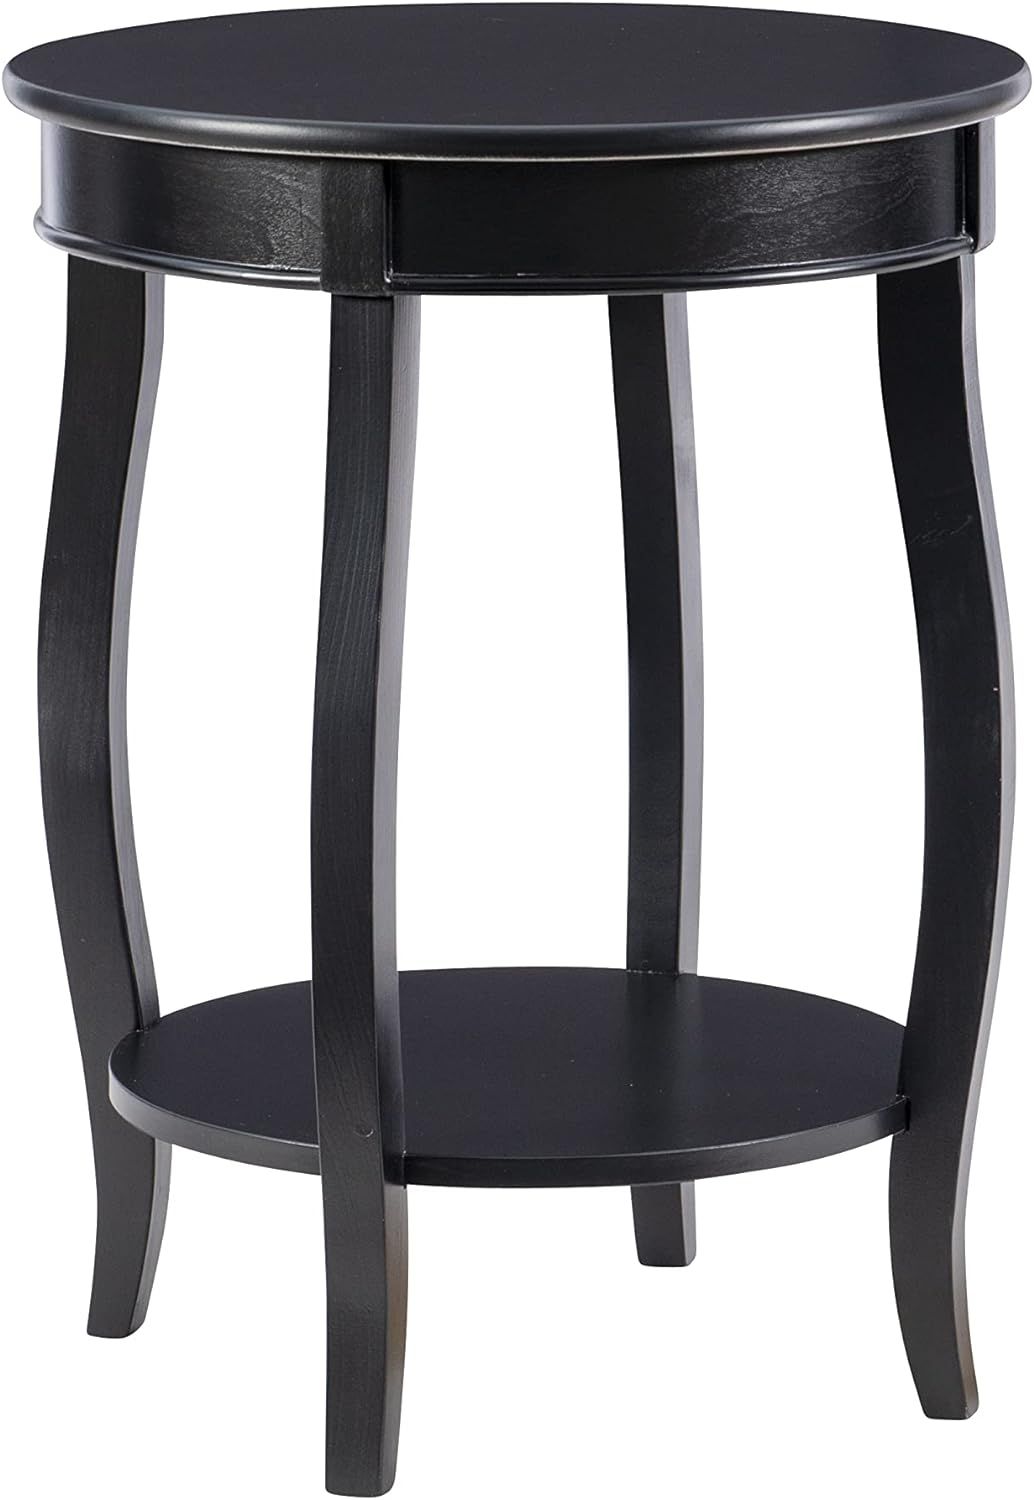 Powell Furniture Round Table with Shelf, Black | Amazon (US)